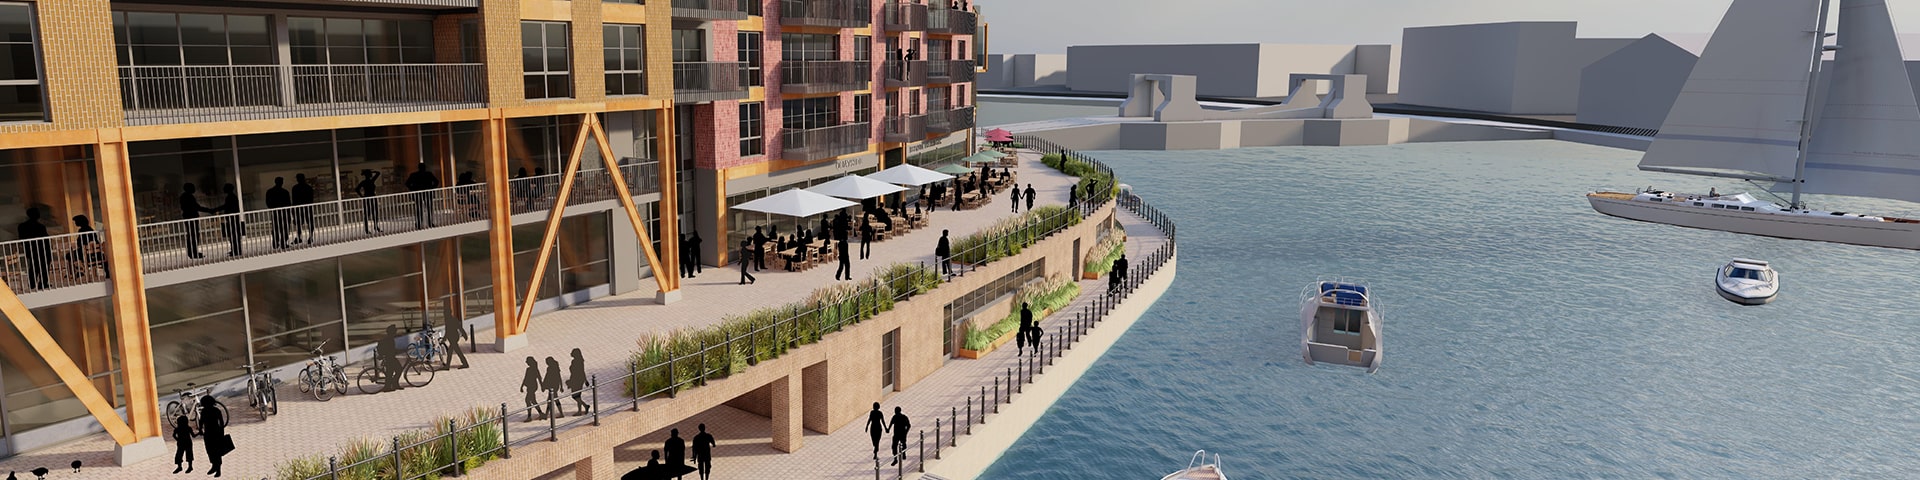 Concept image of Ian's design of modern buildings on the waterfront